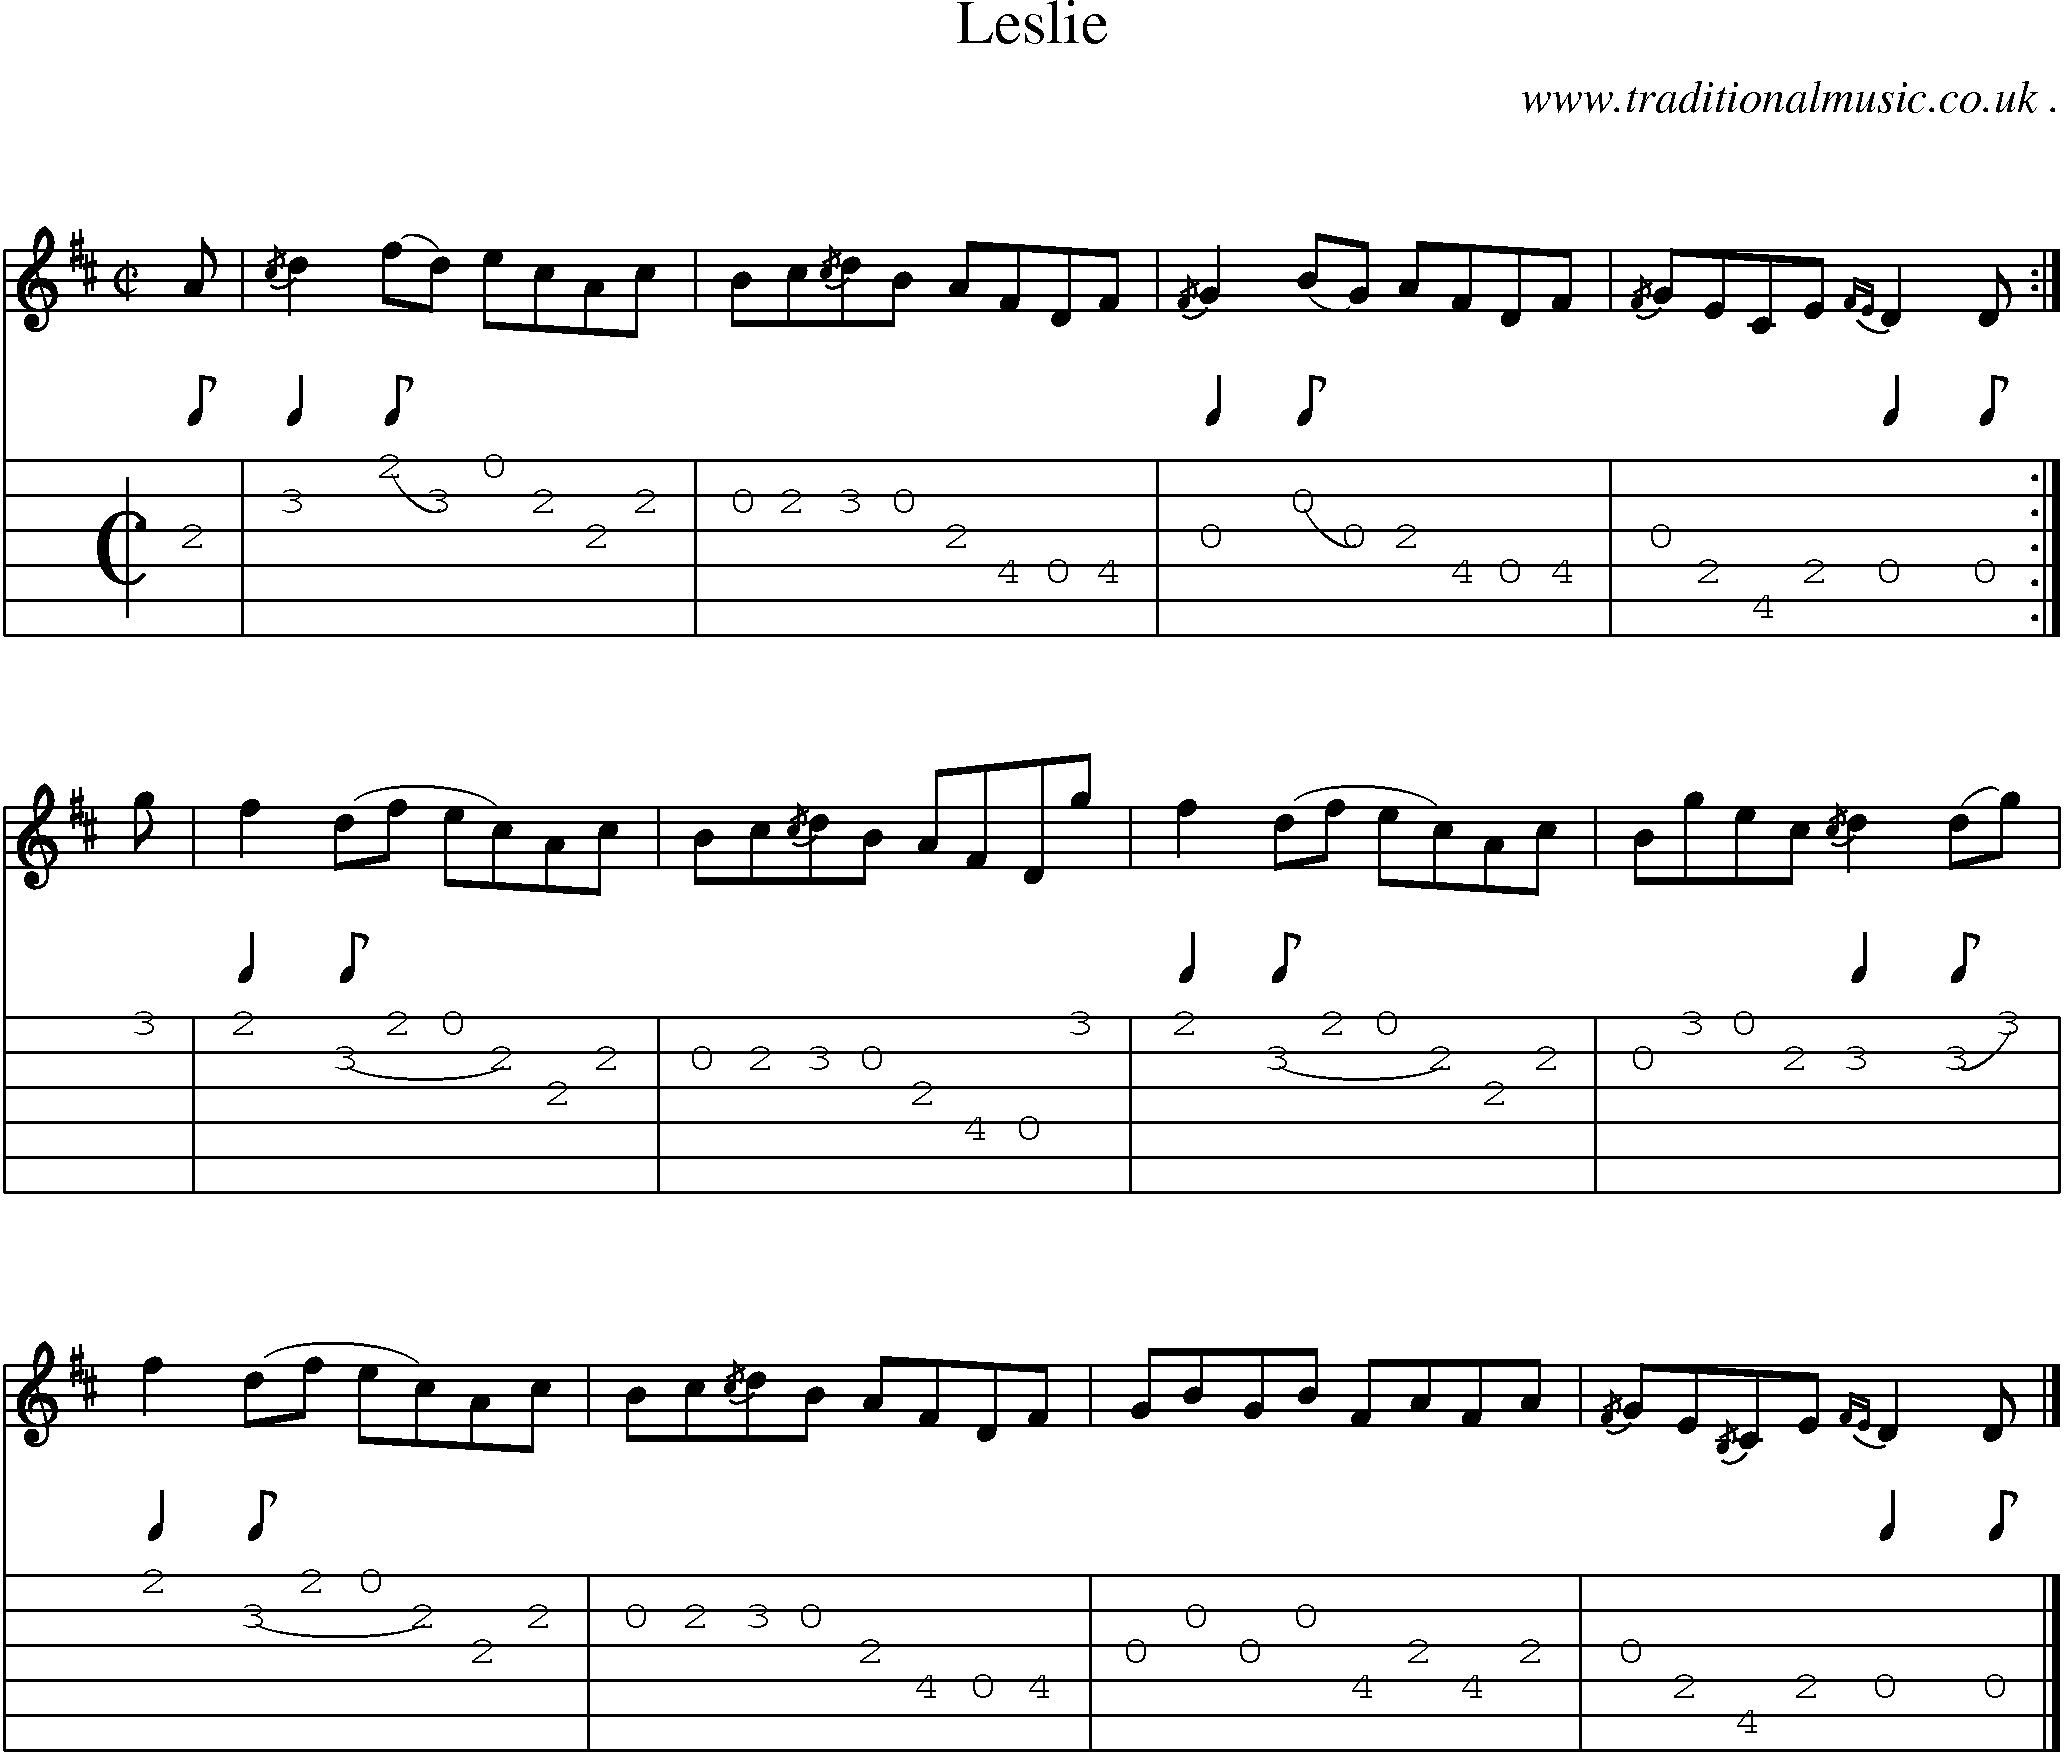 Sheet-music  score, Chords and Guitar Tabs for Leslie